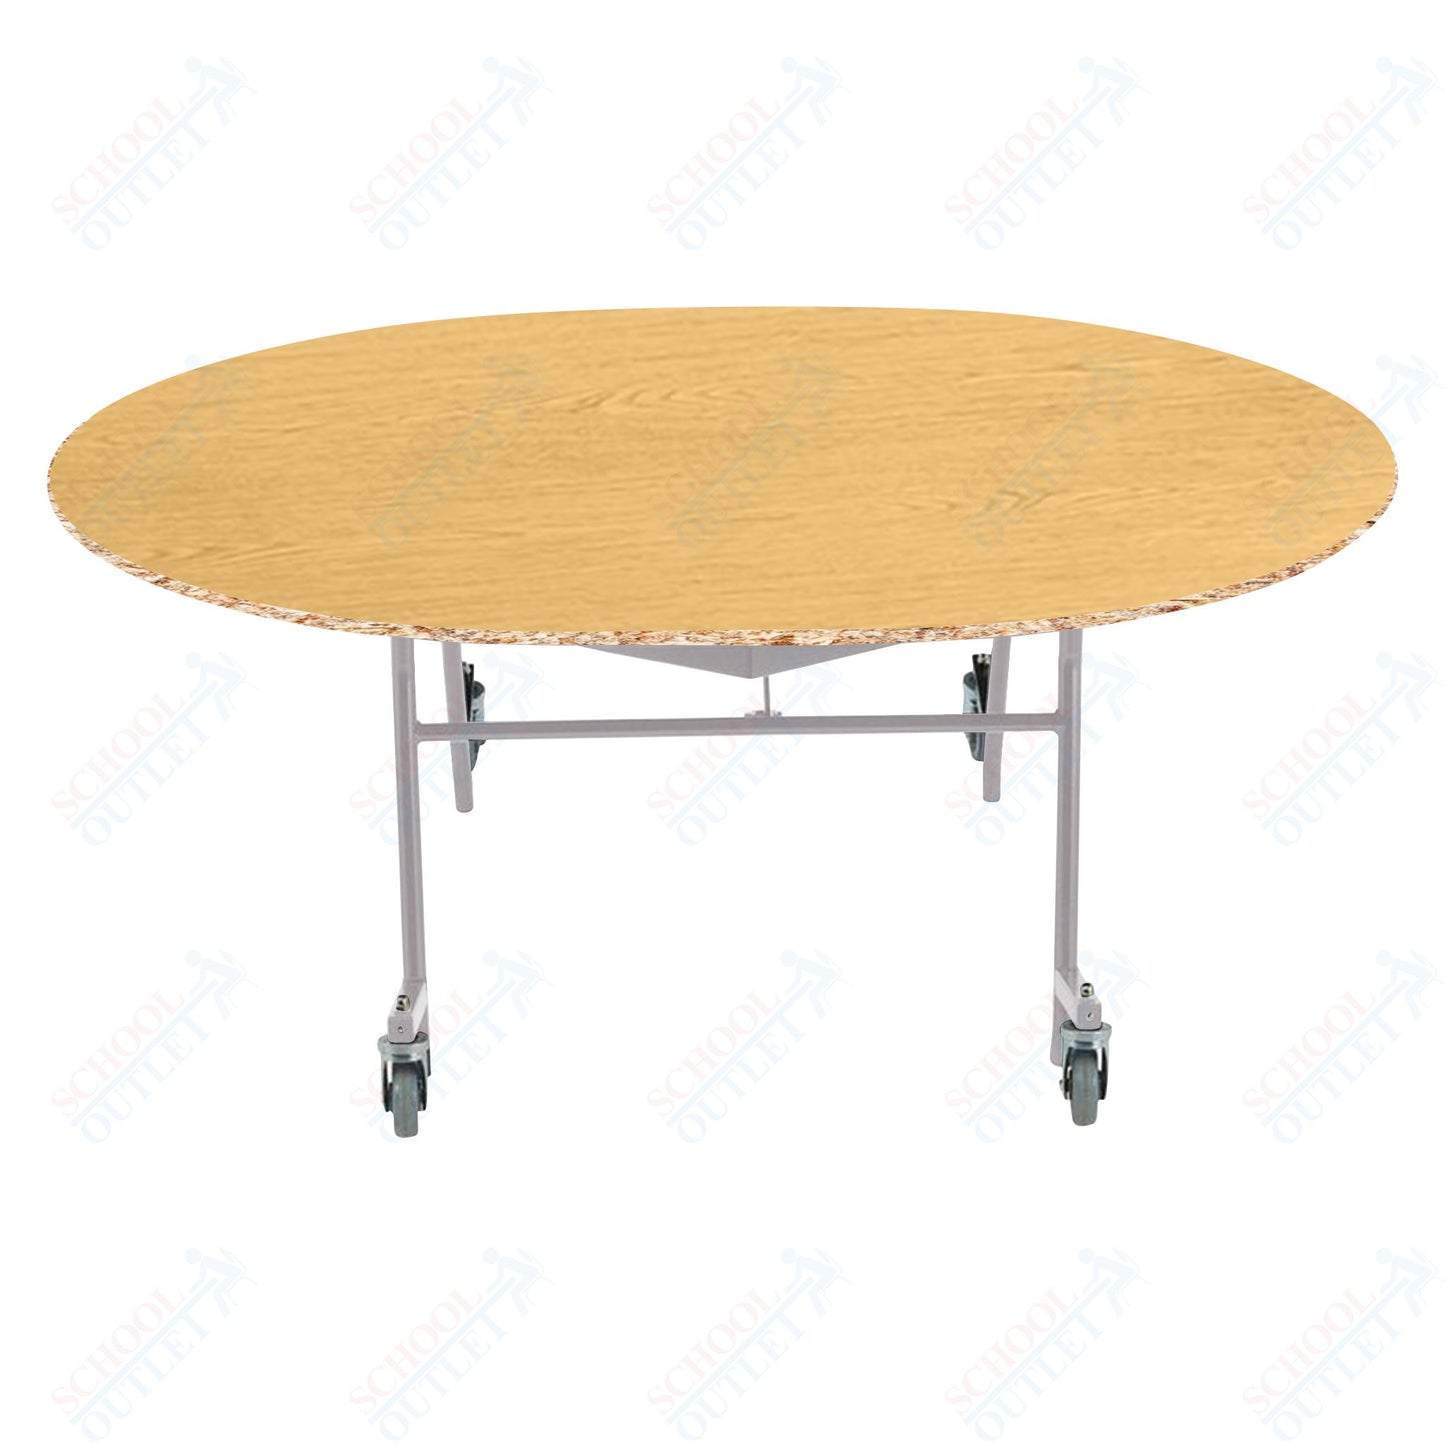 NPS EasyFold 60" x 72" Oval Table (National Public Seating NPS-MTSSF-60V)